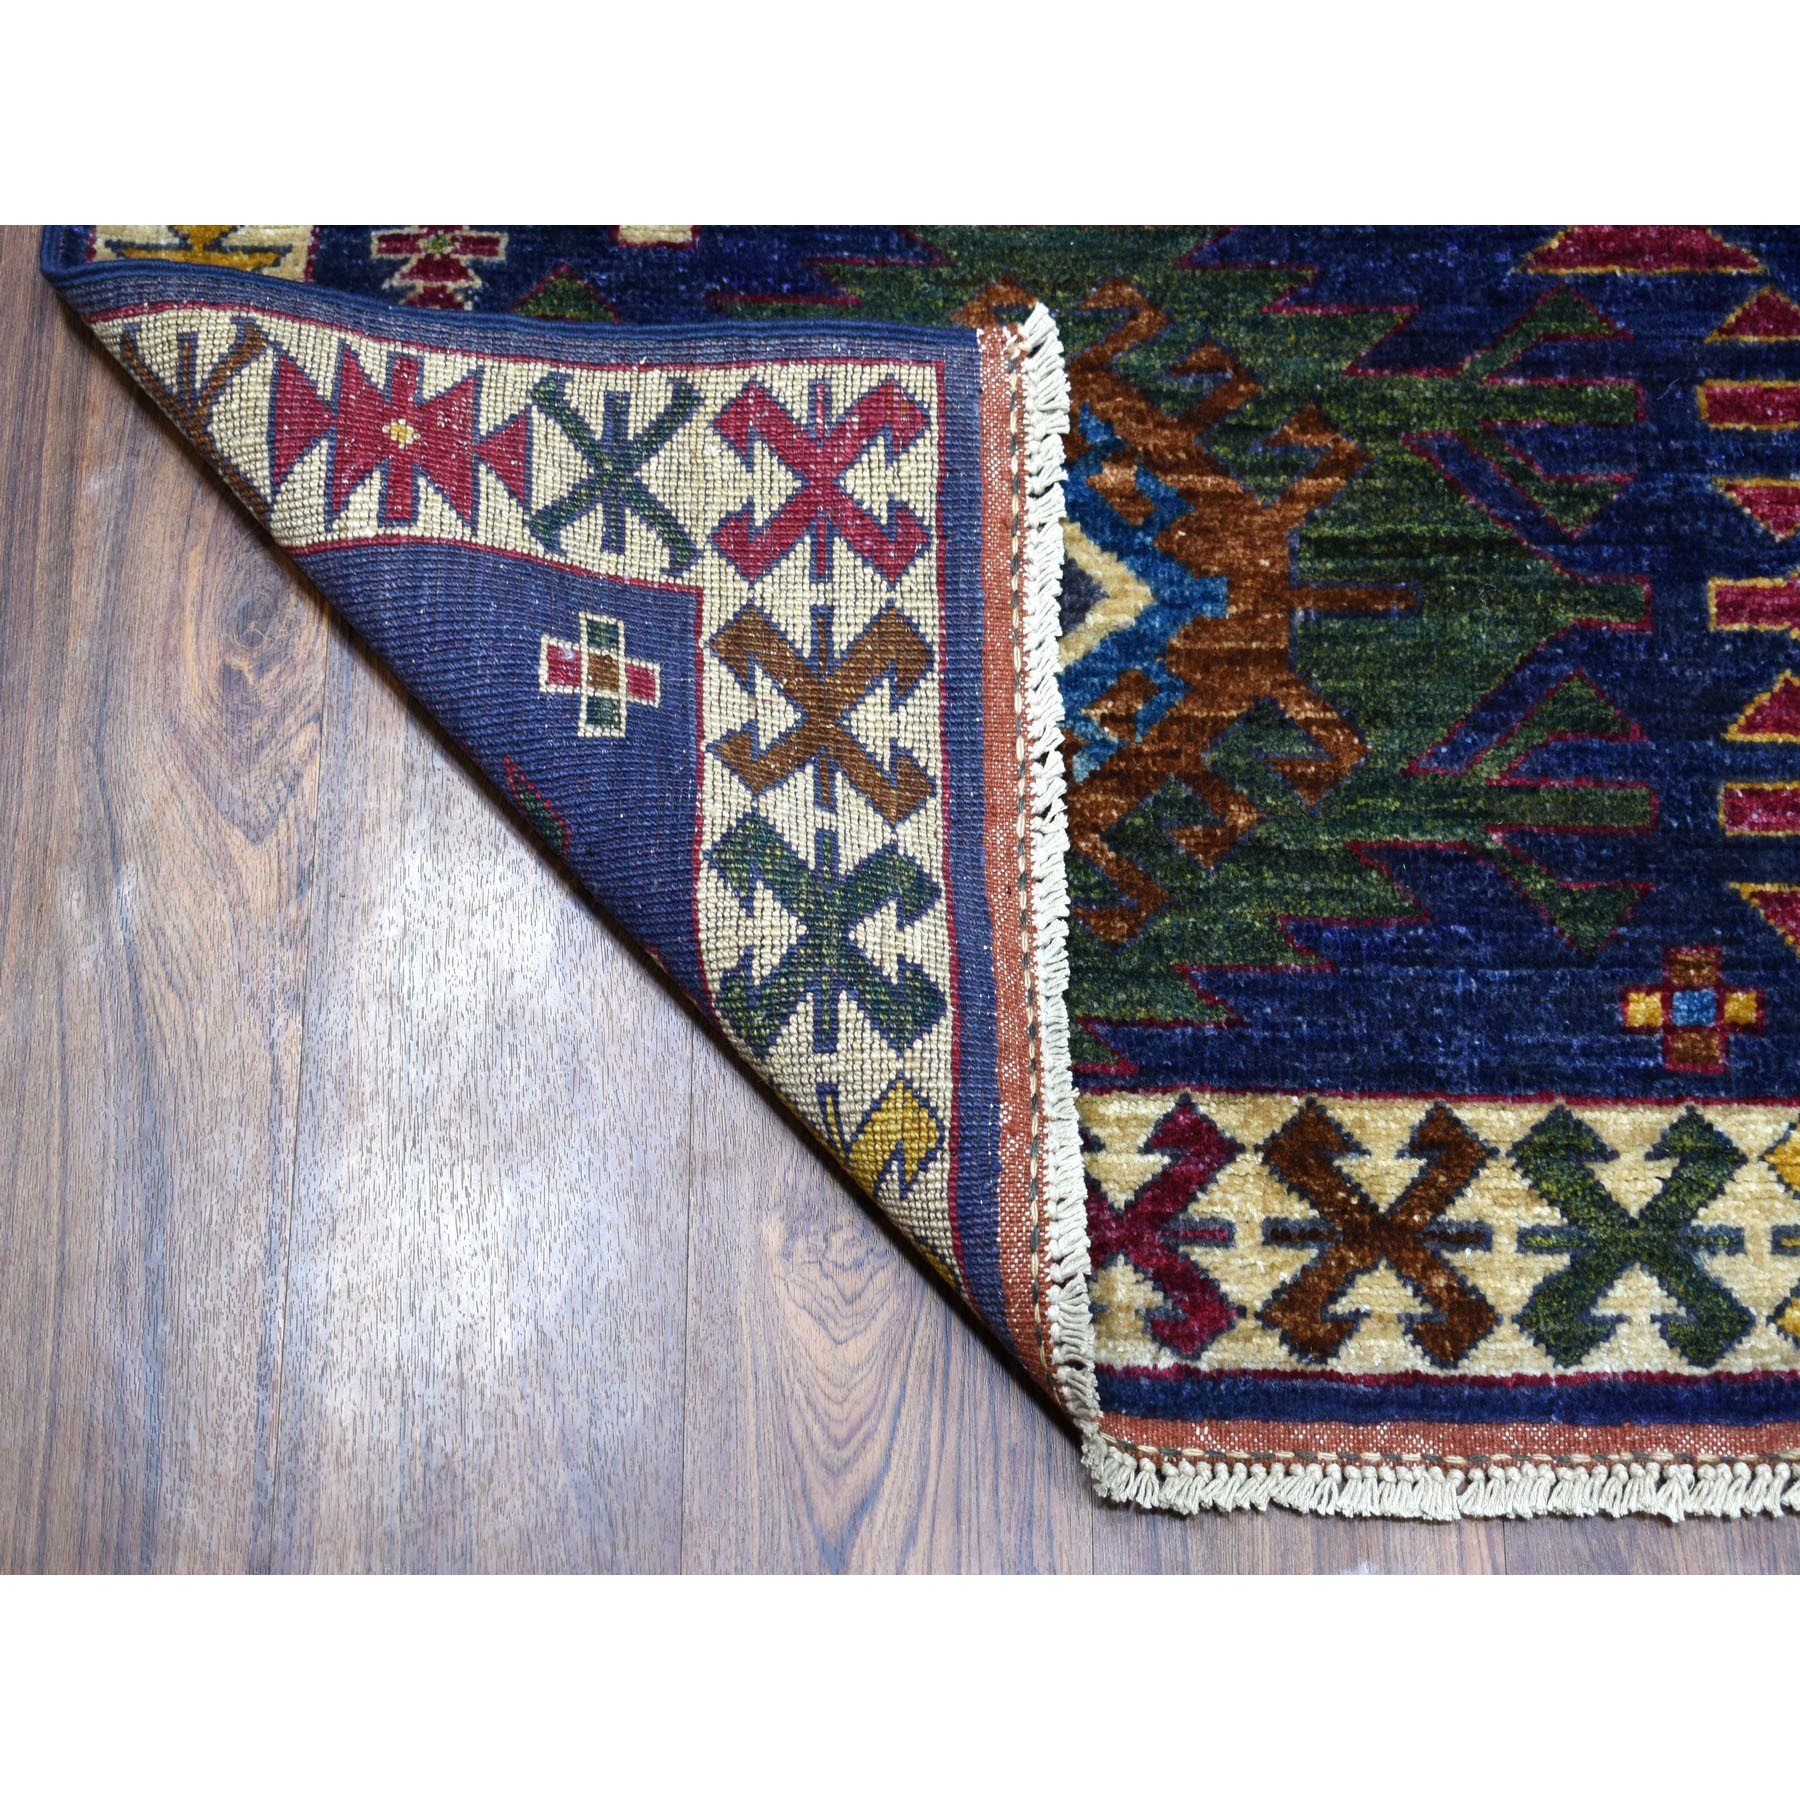 6'x8'10" Afghan Ersari With Large Repetitive Colorful Symbols Hand Woven Oriental Rug 